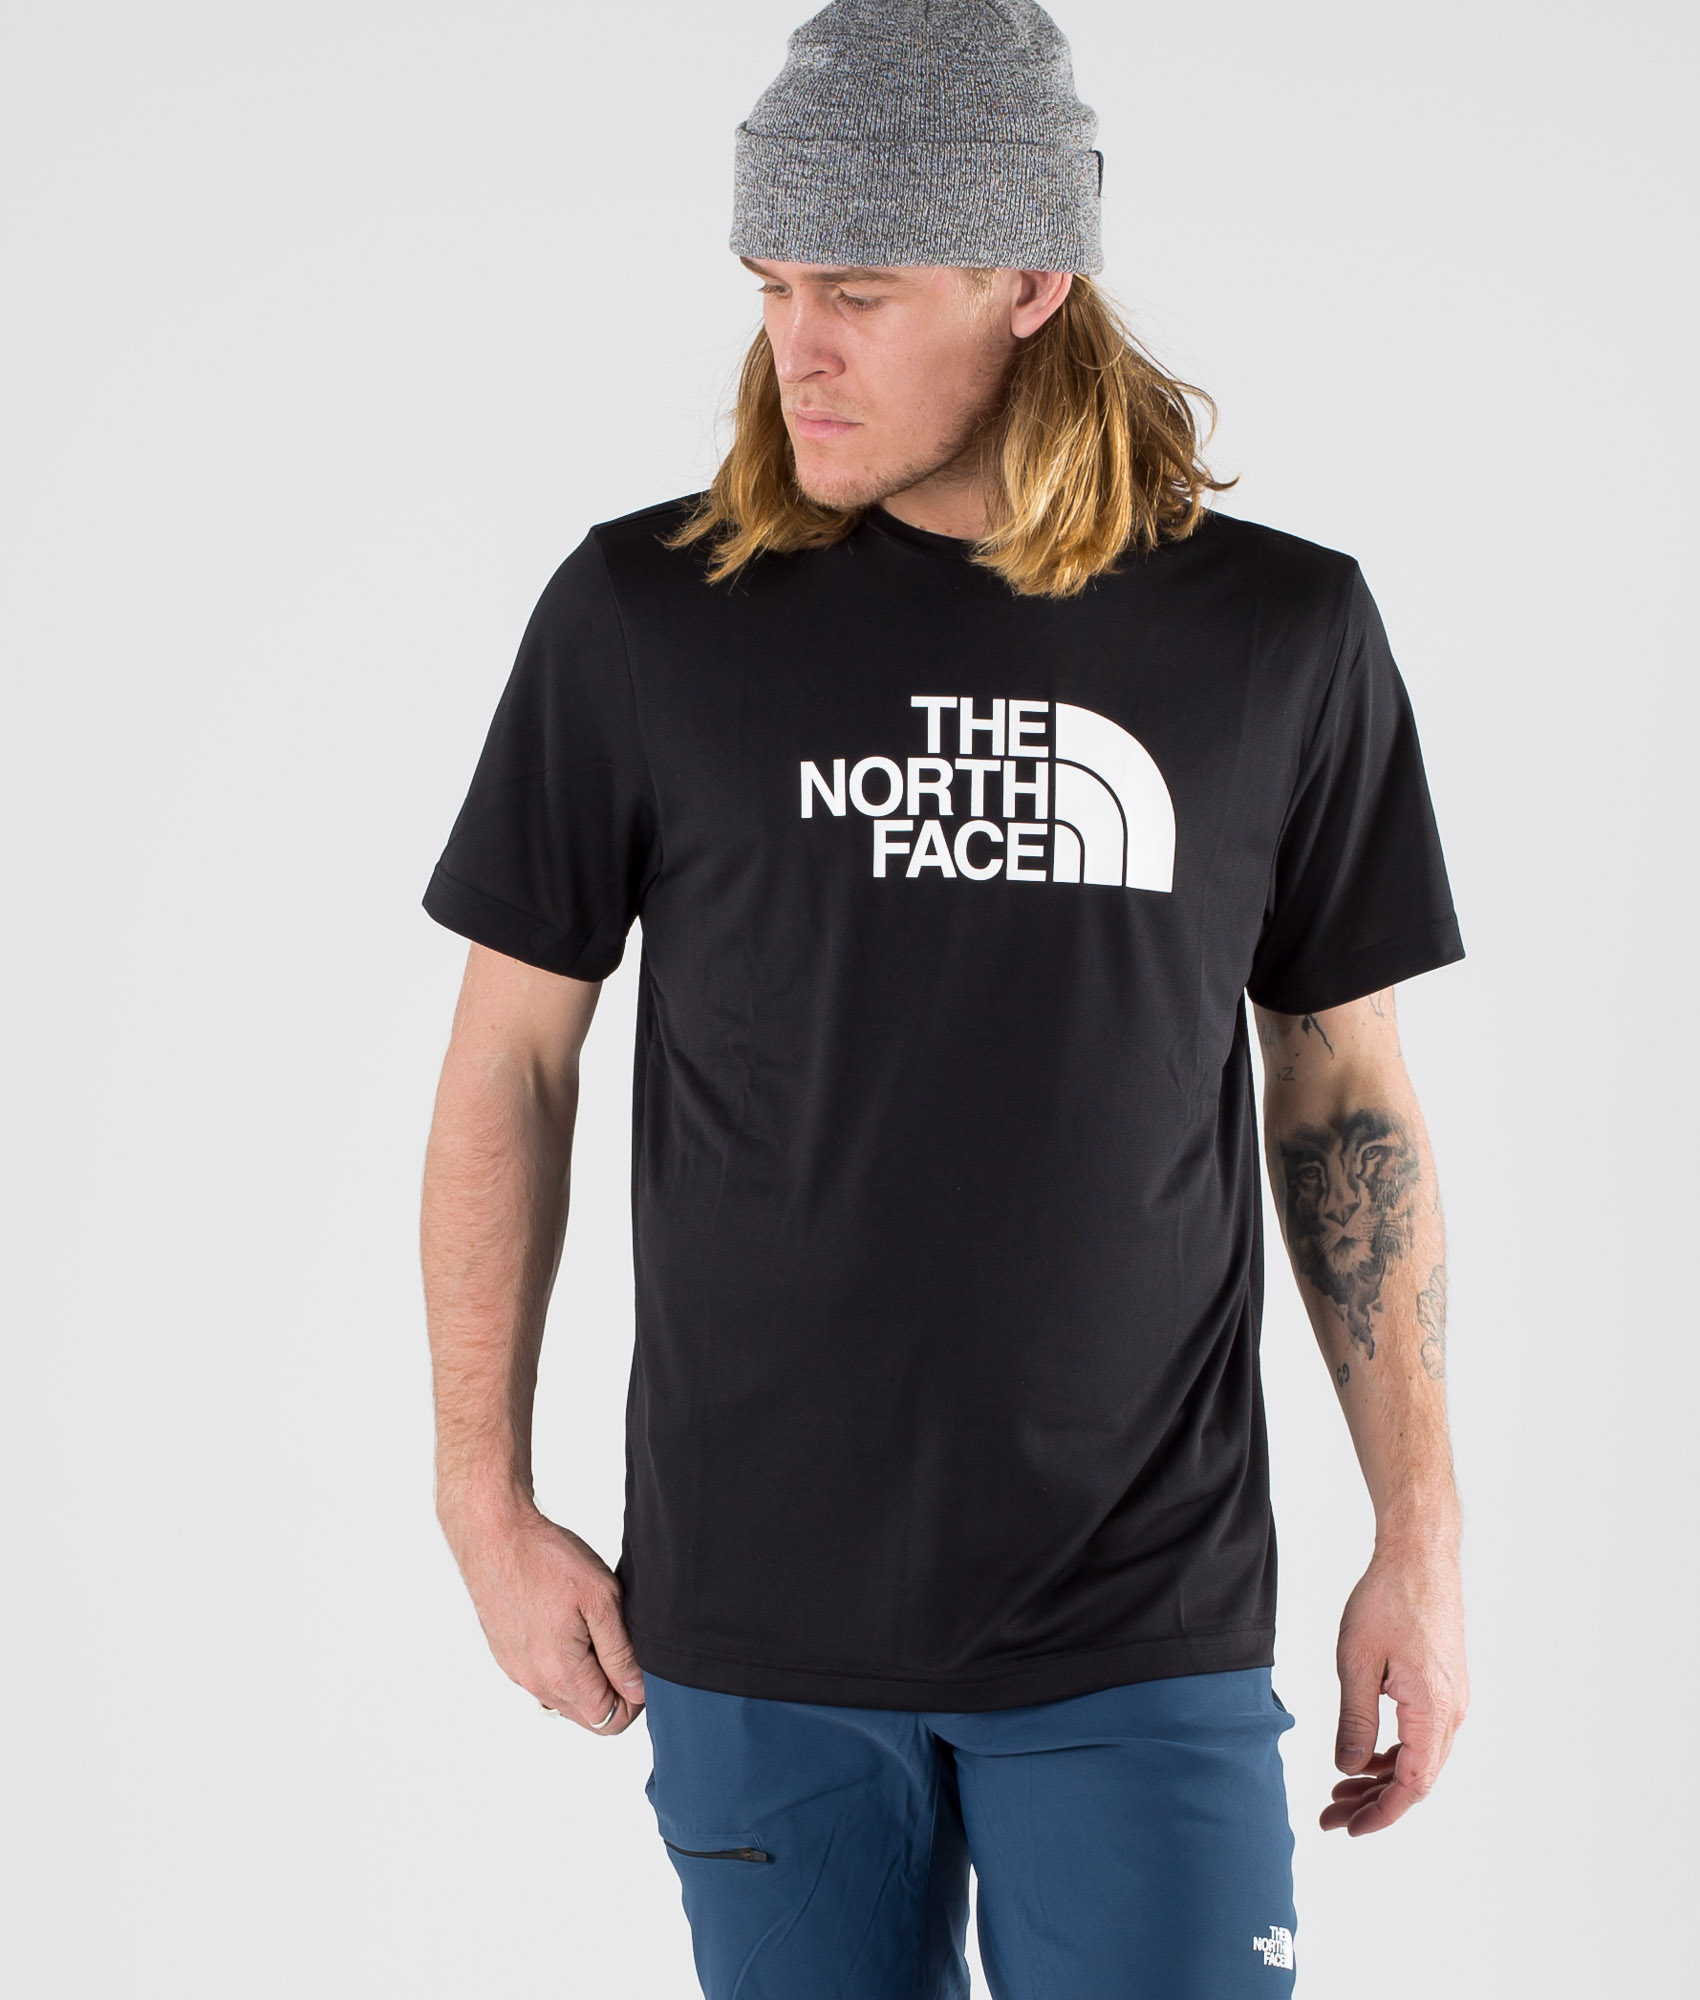 the north face black t shirt